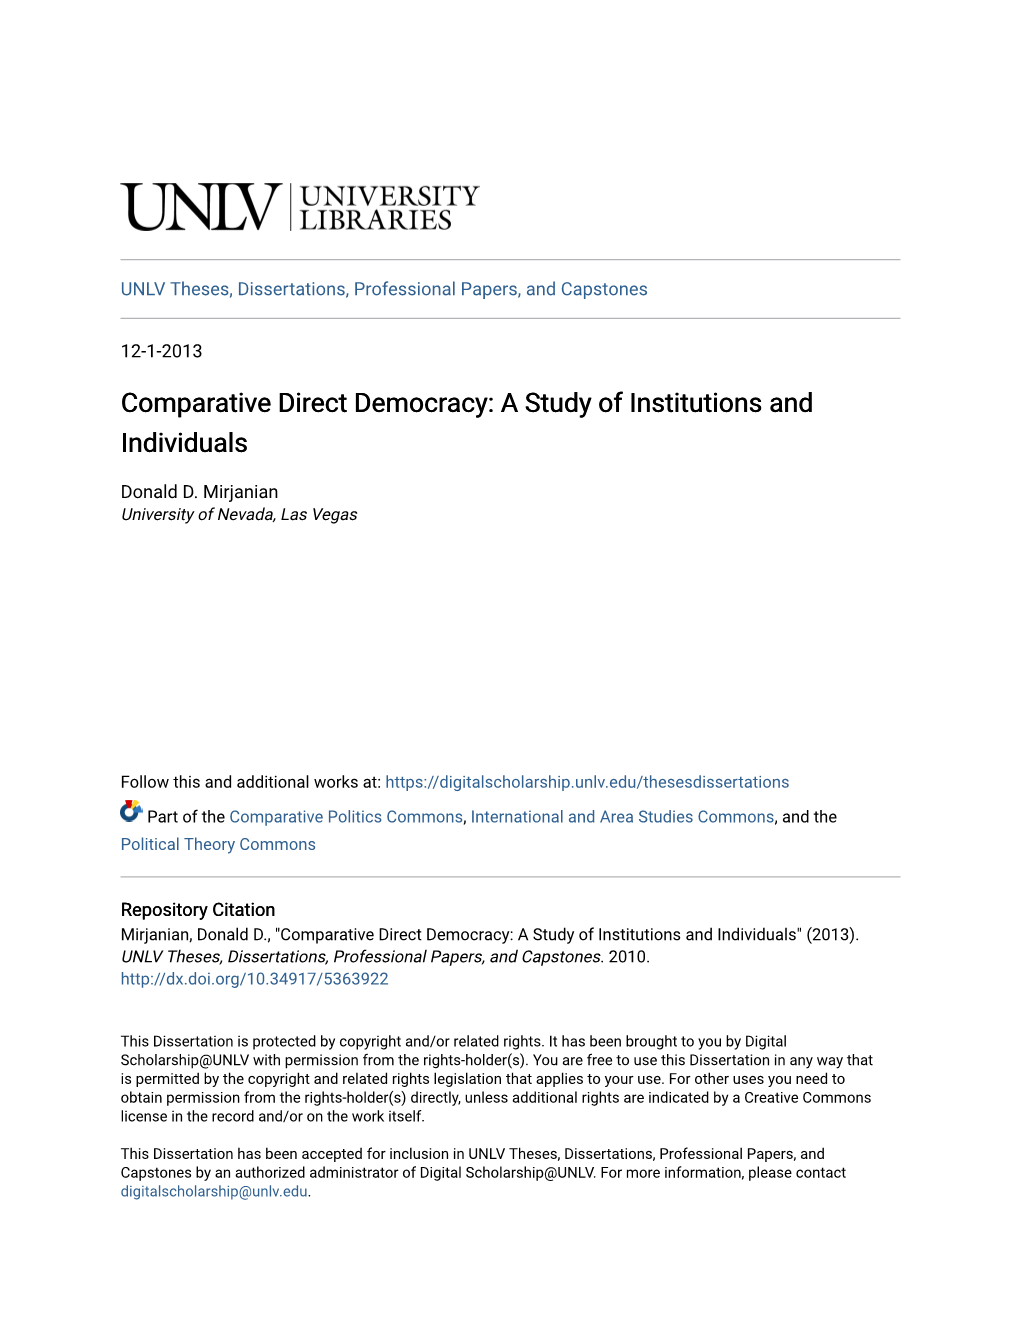 Comparative Direct Democracy: a Study of Institutions and Individuals